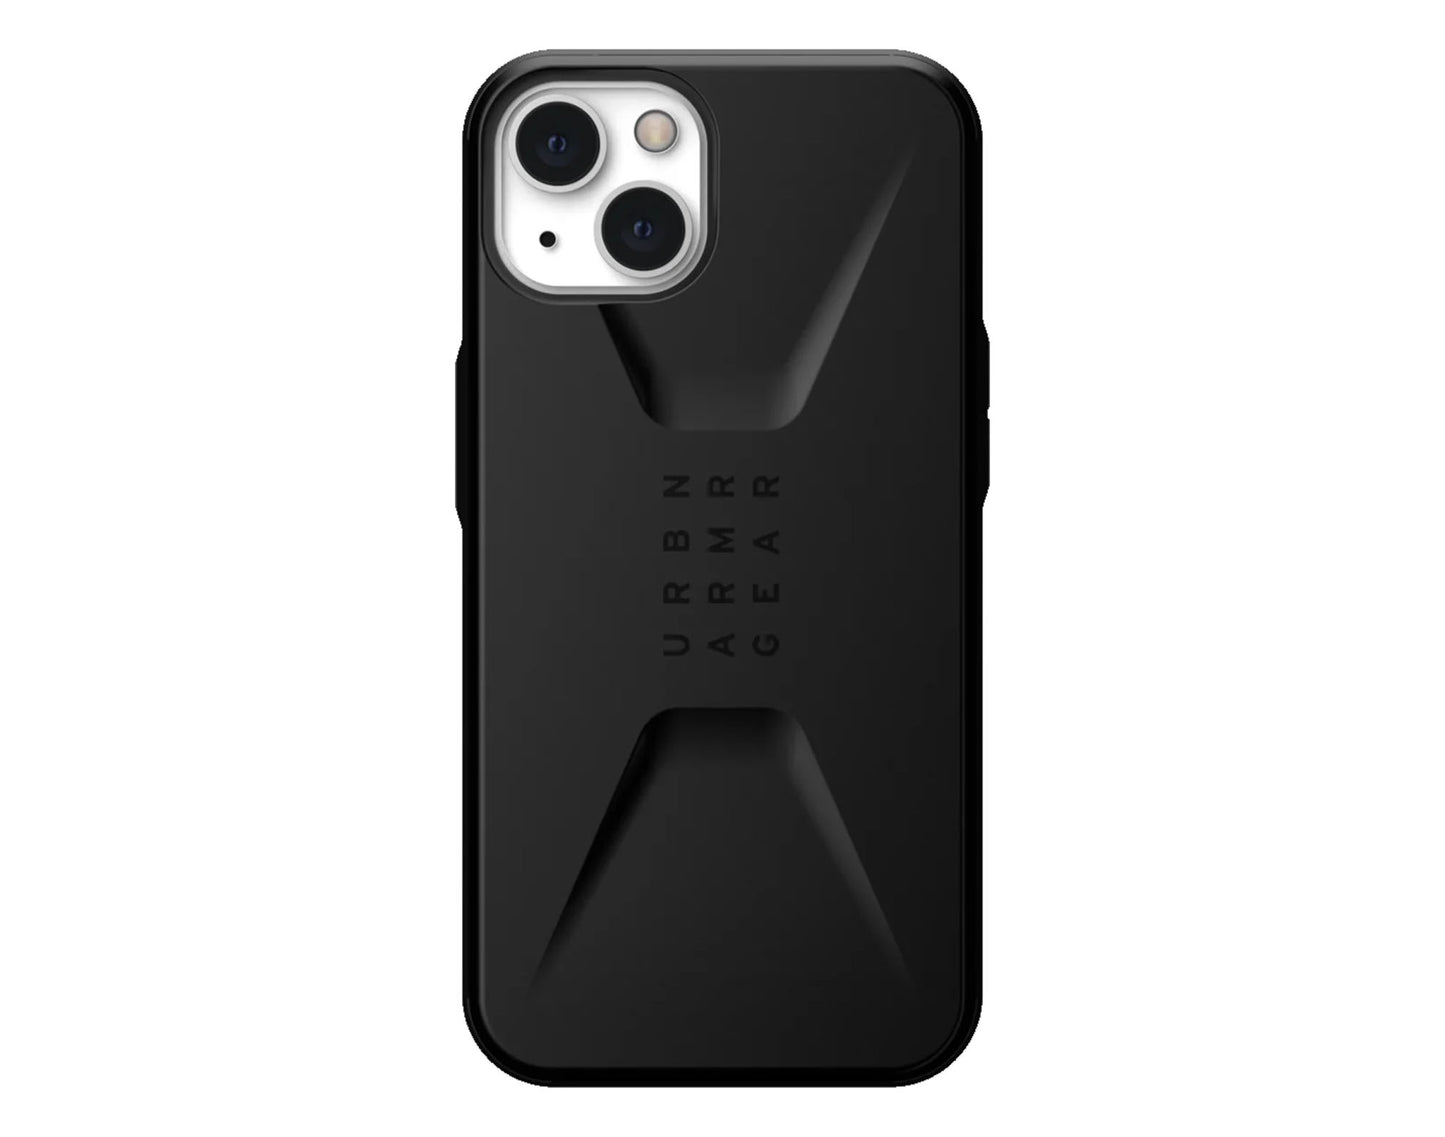 UAG Civilian for iPhone 13 5G 6.1" - Black  (Barcode: 810070364465)